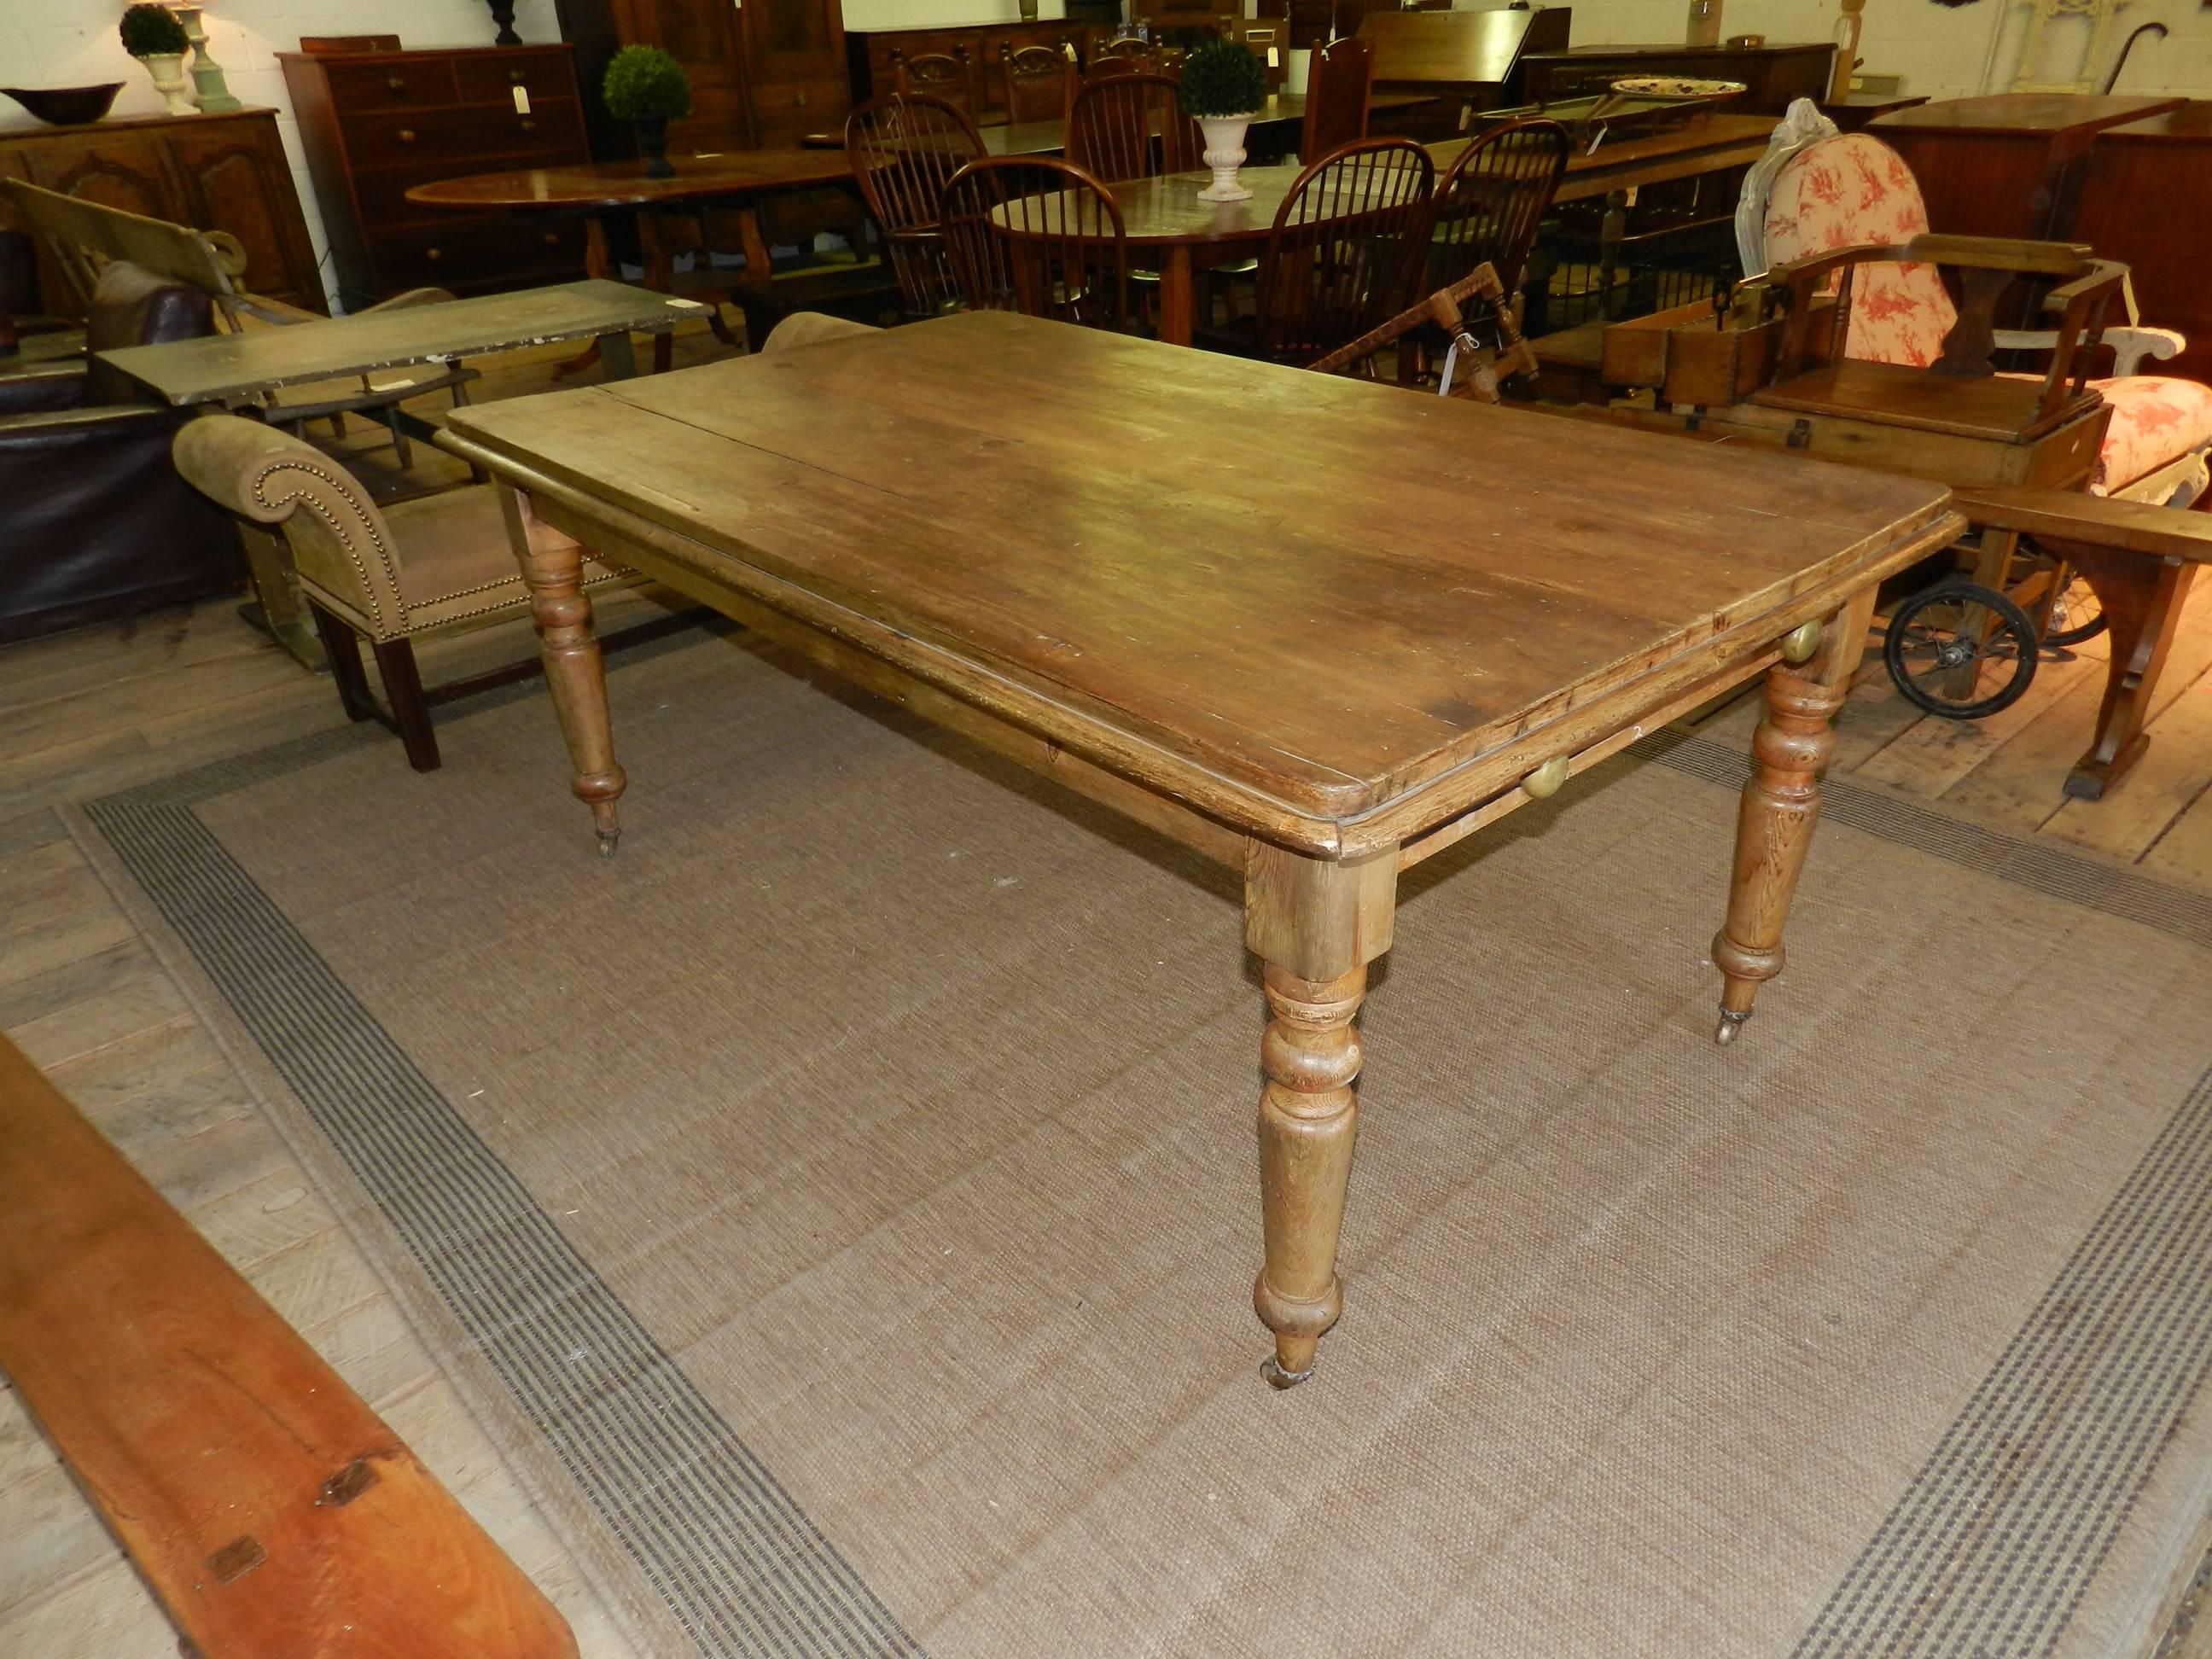 Scottish antique pine farm table with turned legs and drawer with brass knobs.